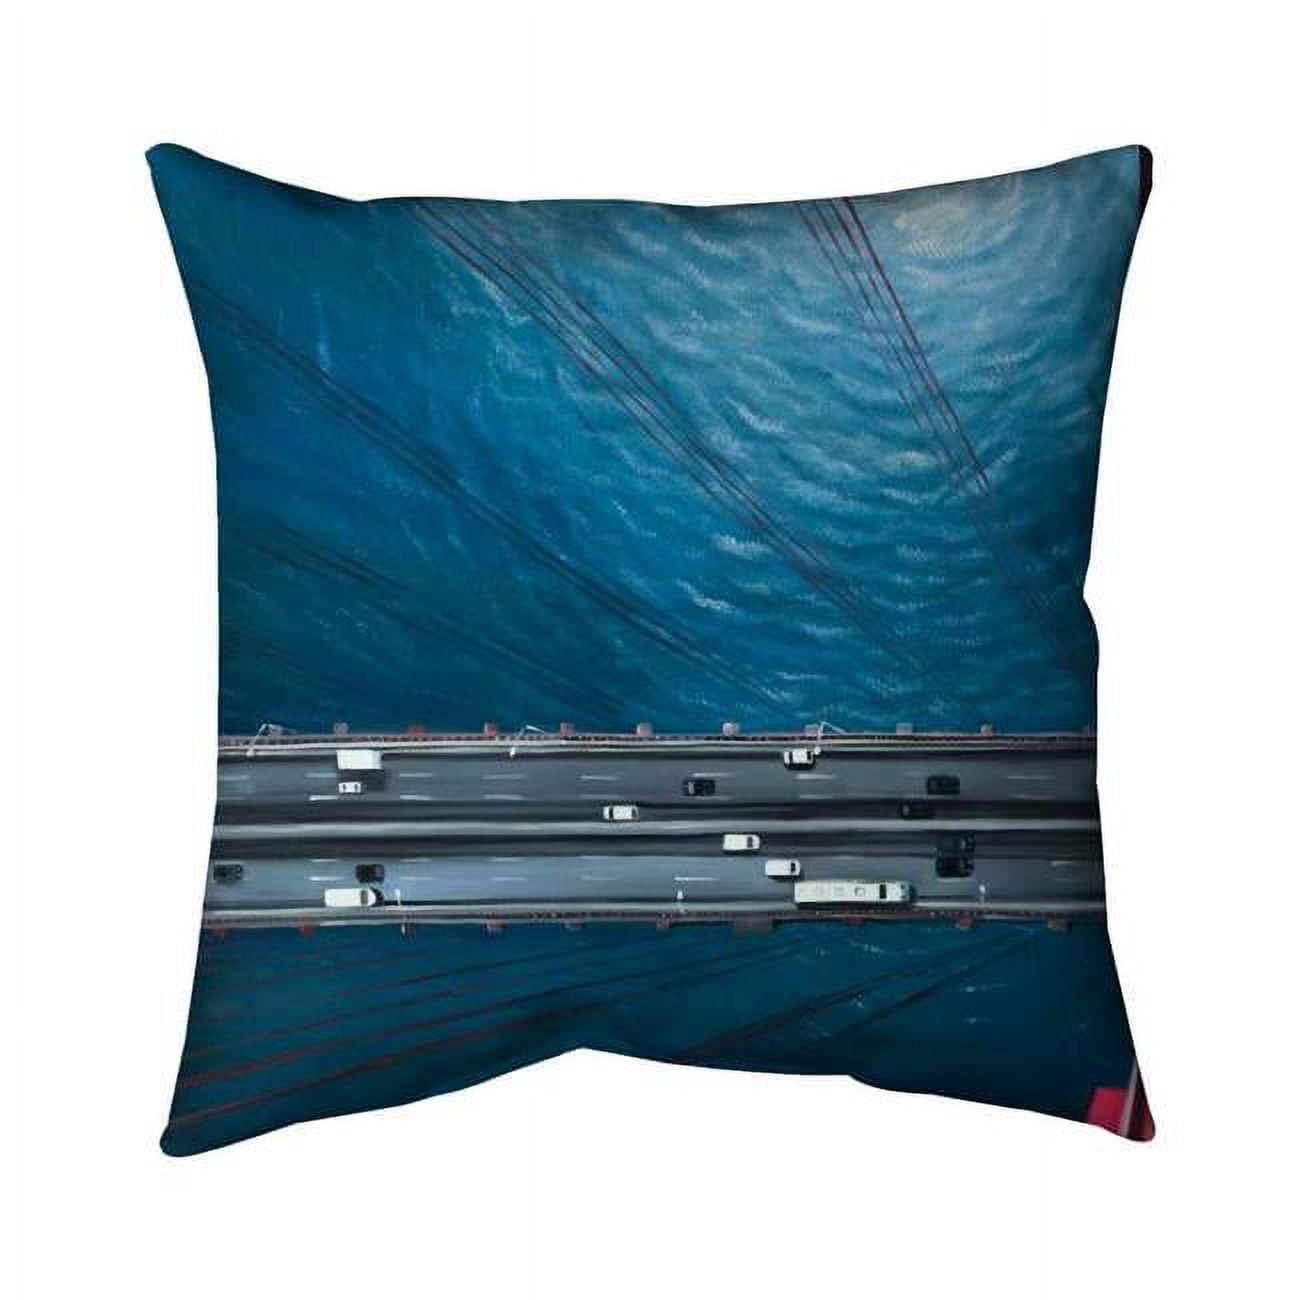 Begin Home Decor 5543-2020-CI365 20 x 20 in. Overhead View of Traffic on the Golden Gate-Double Sided Print Indoor Pillow Cover